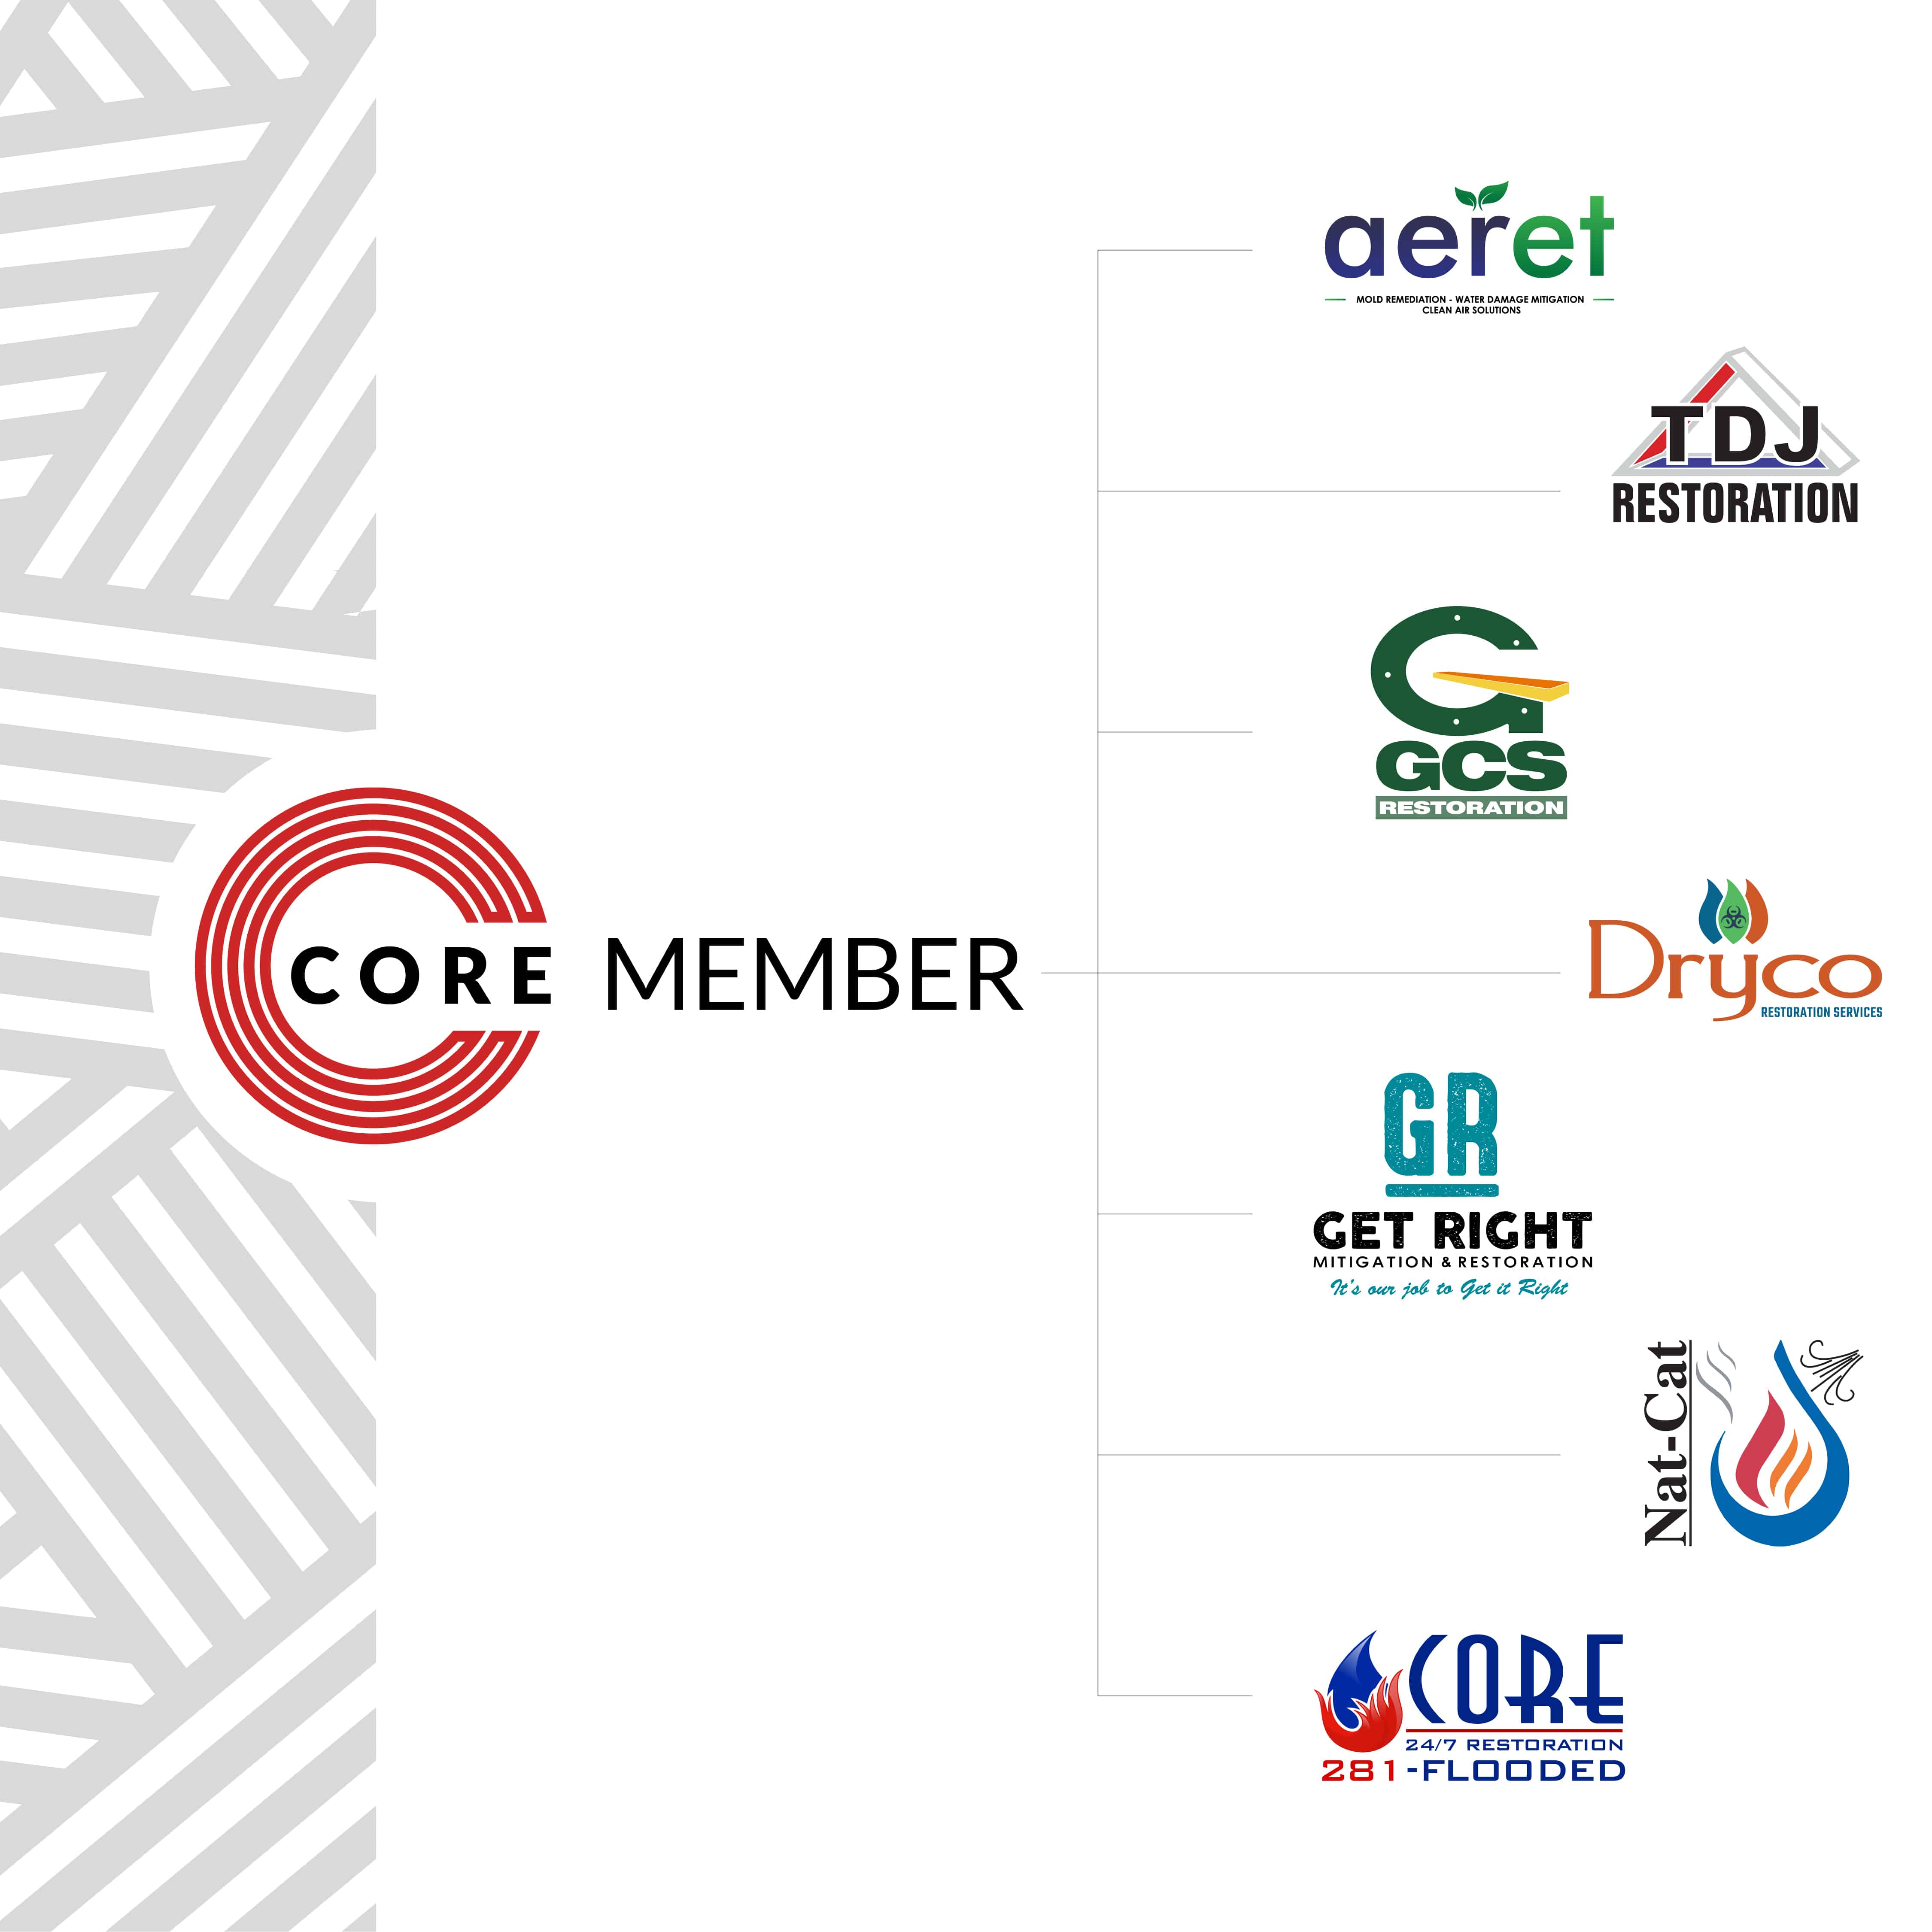 Seven Independent Restorers across North America Join as CORE Members